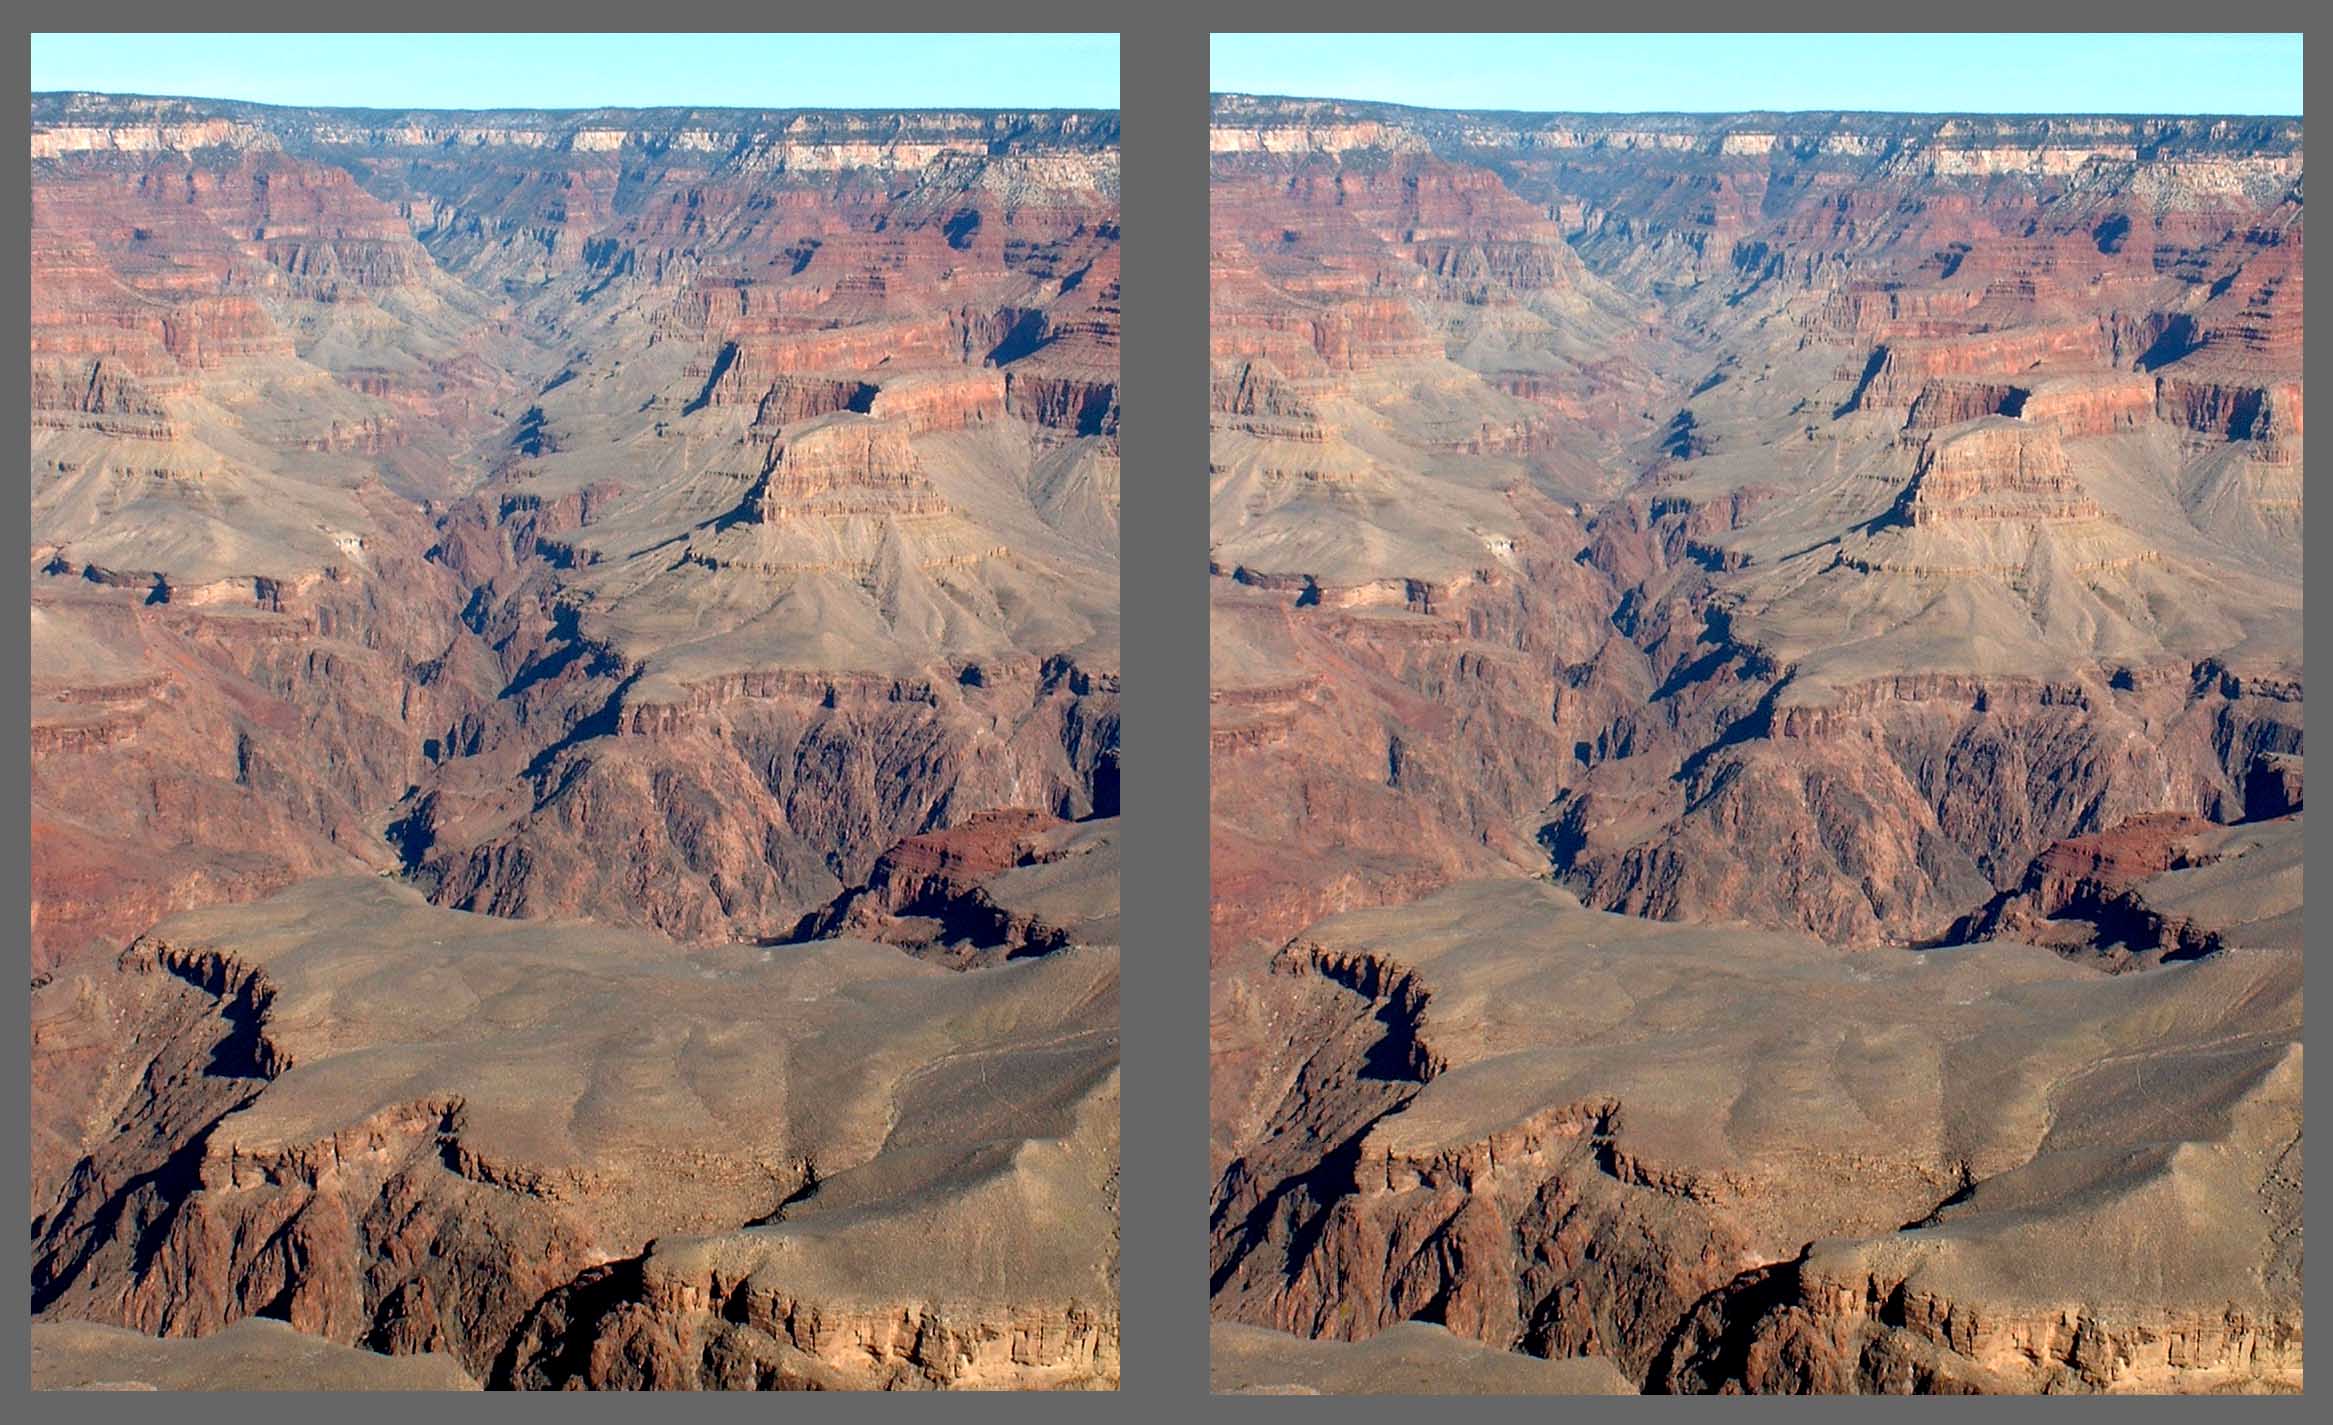 Stereo Photo - Grand Canyon View A - Cross-eyed viewing method